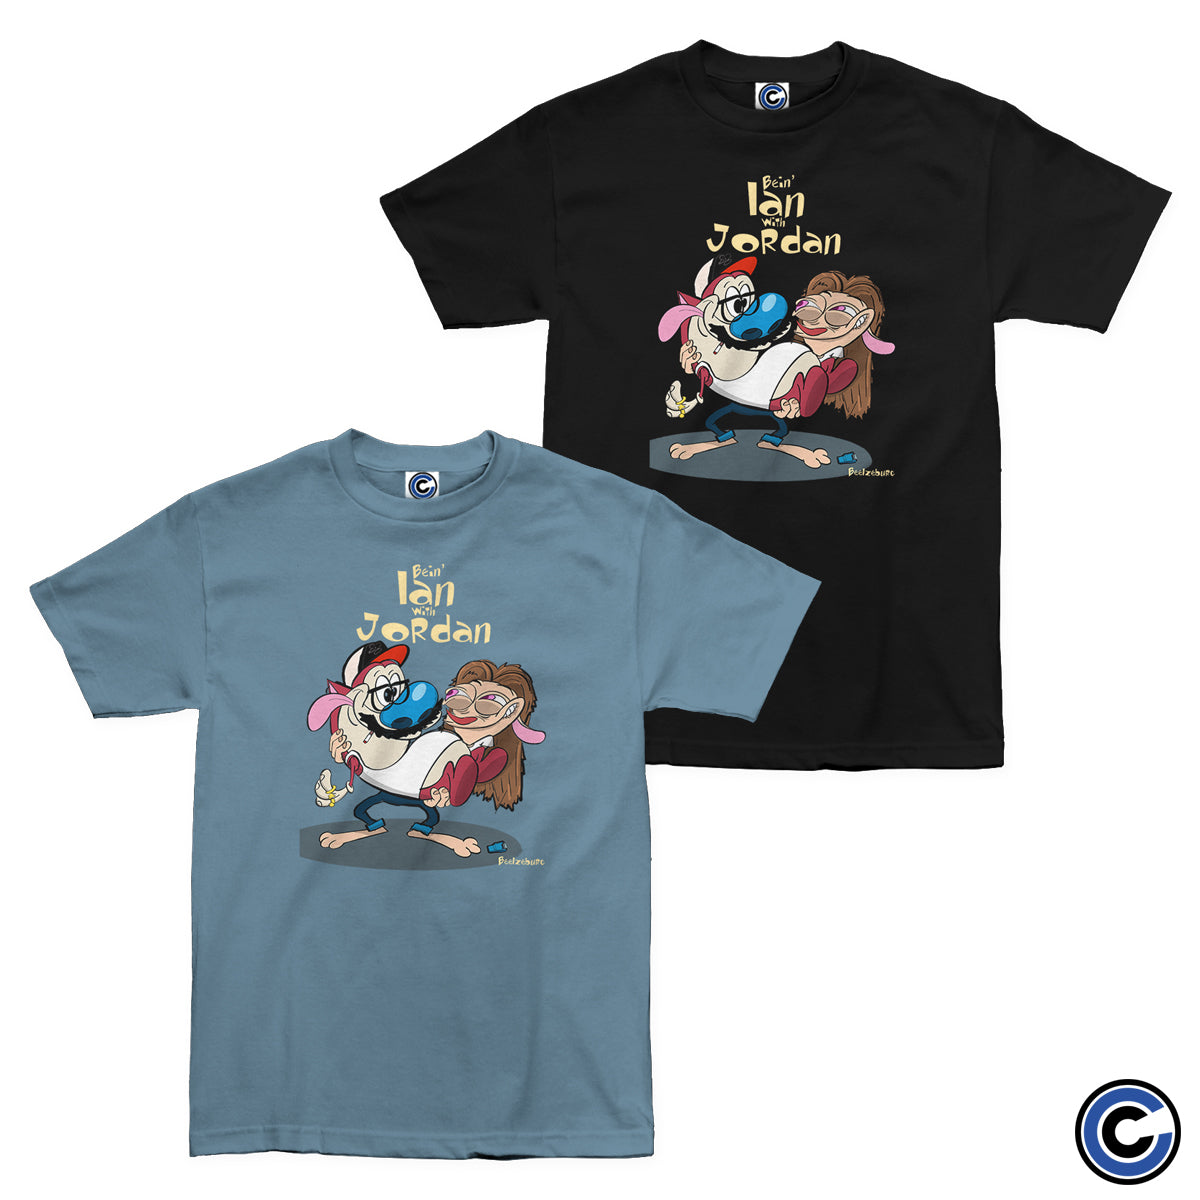 Bein' Ian with Jordan Podcast "Cigarettes and Cartoons" Shirt (Comfort Colors)